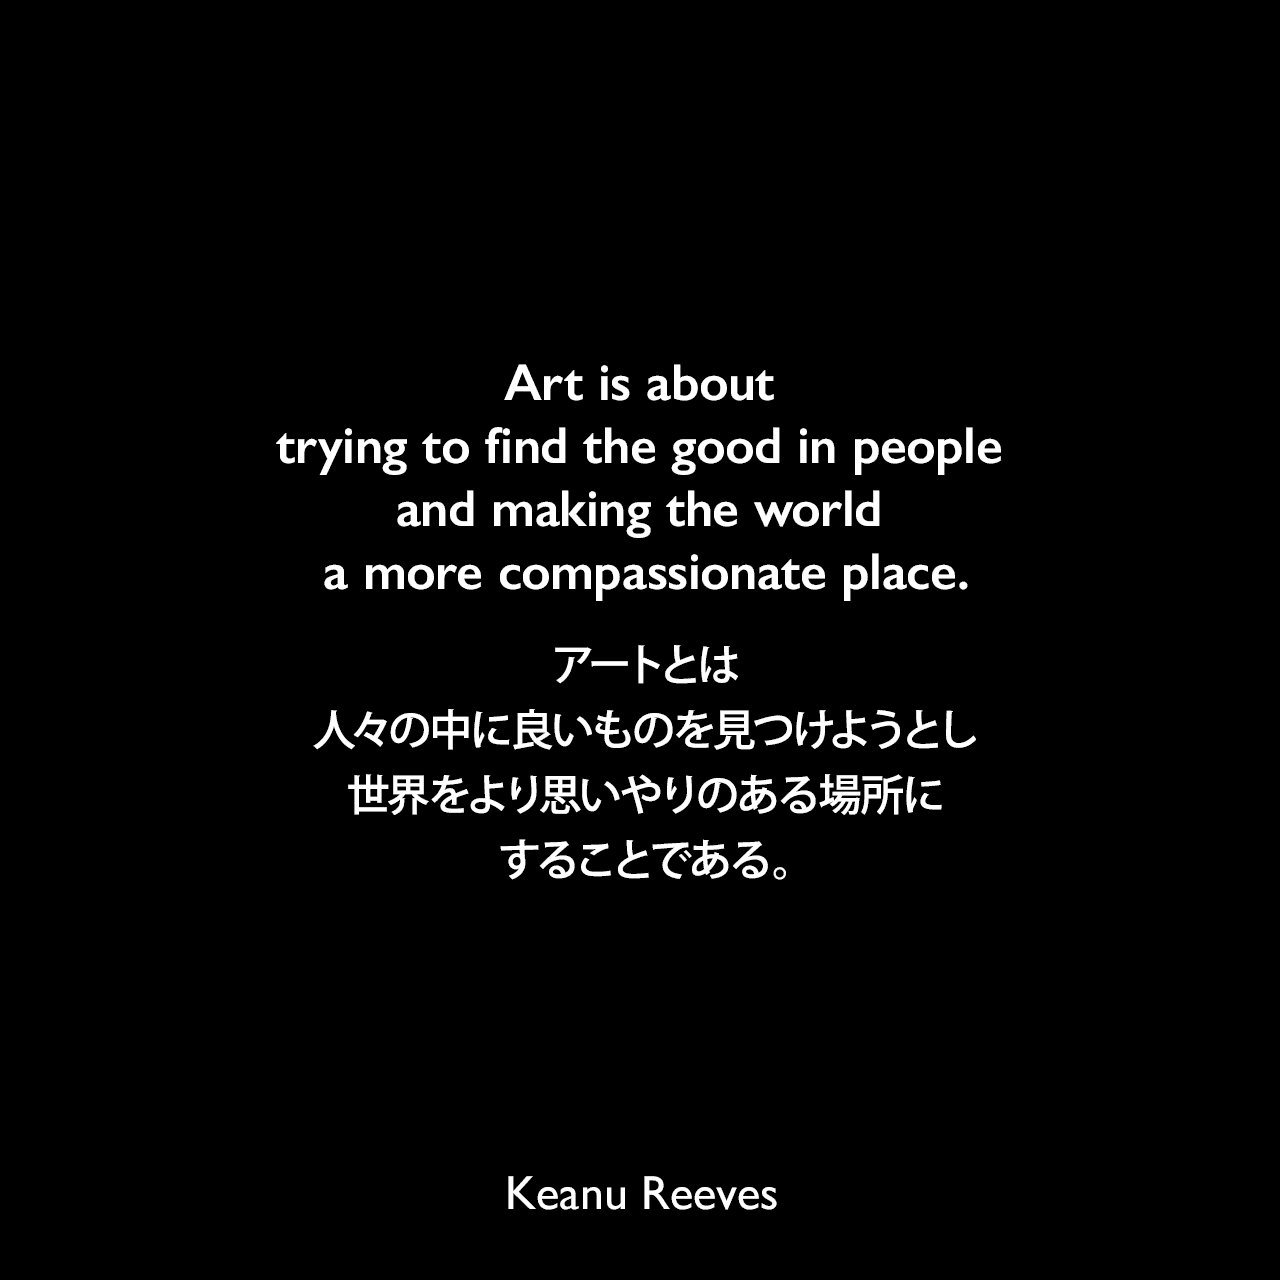 Art is about trying to find the good in people and making the world a more compassionate place.アートとは、人々の中に良いものを見つけようとし、世界をより思いやりのある場所にすることである。Keanu Reeves